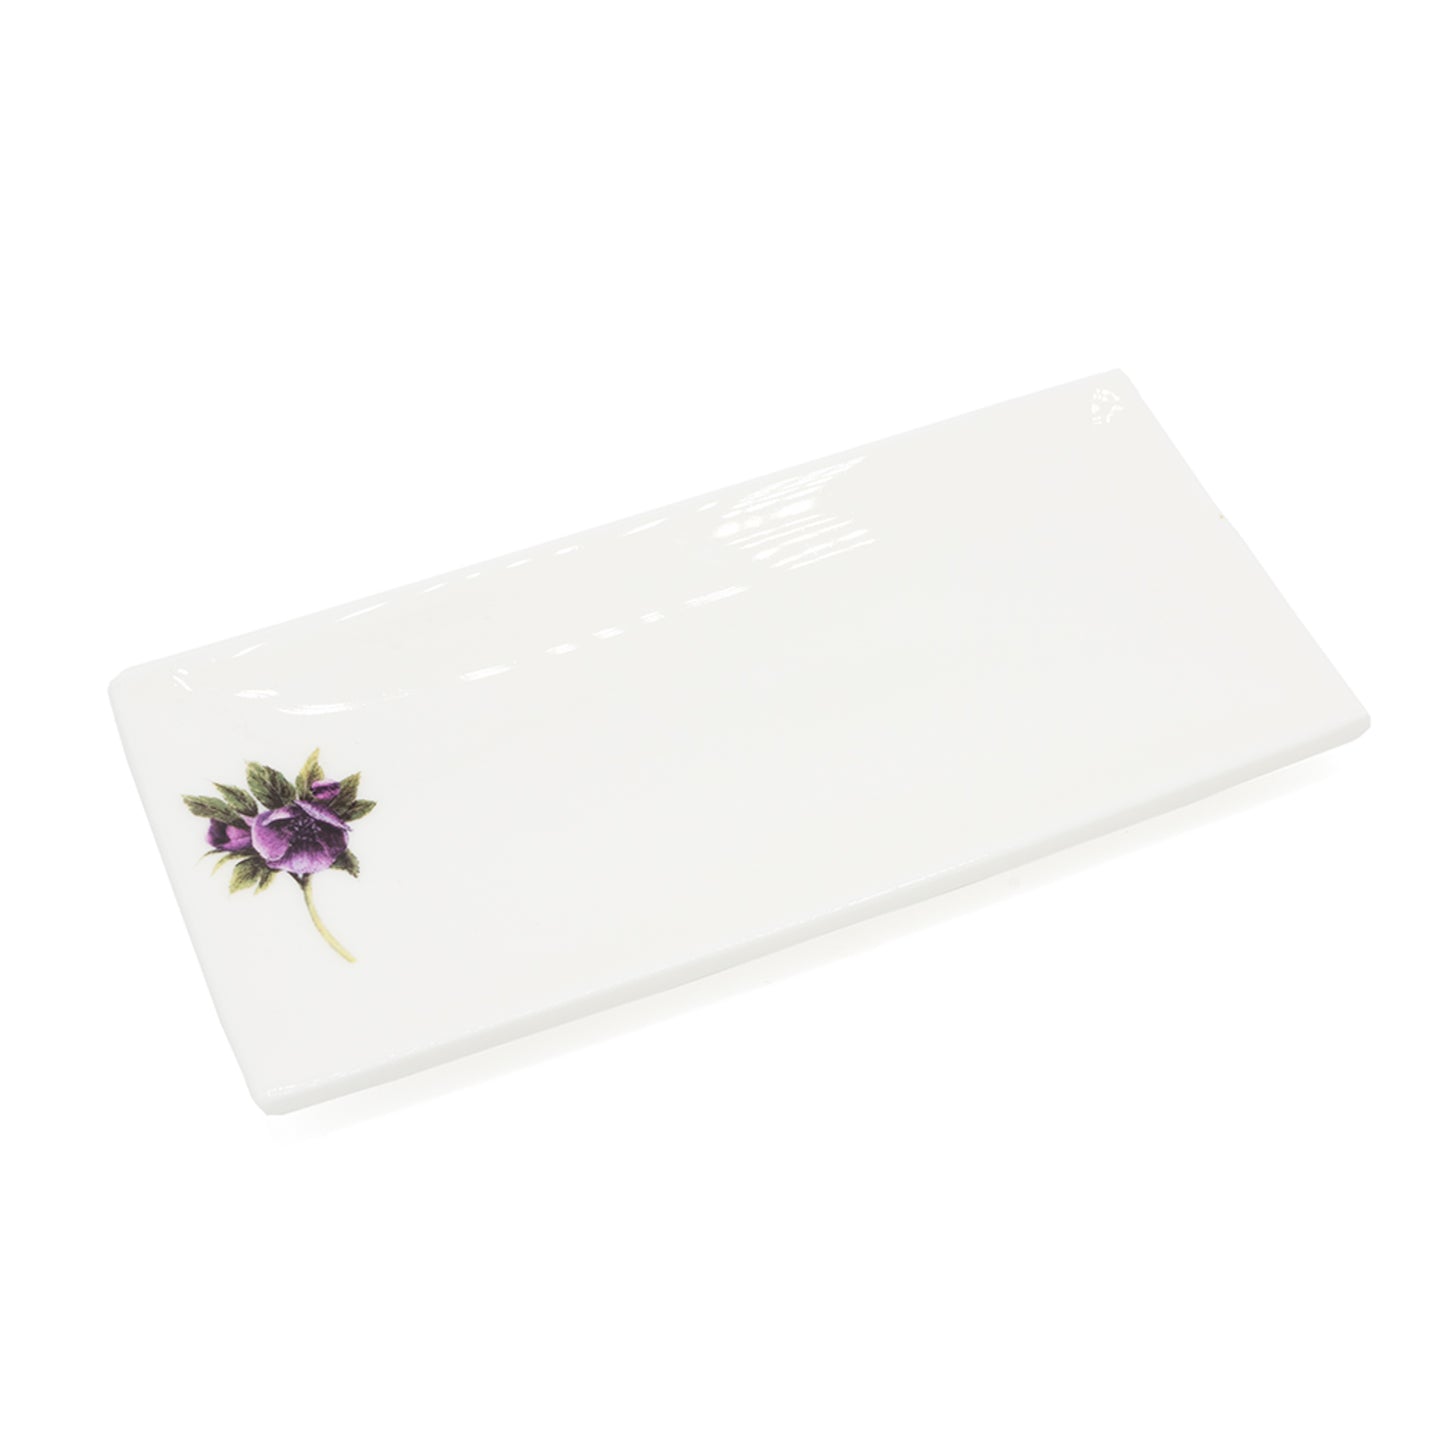 Load image into Gallery viewer, White rectangular soap dish with an illustration of a hellebore flower. Photographed against white background.
